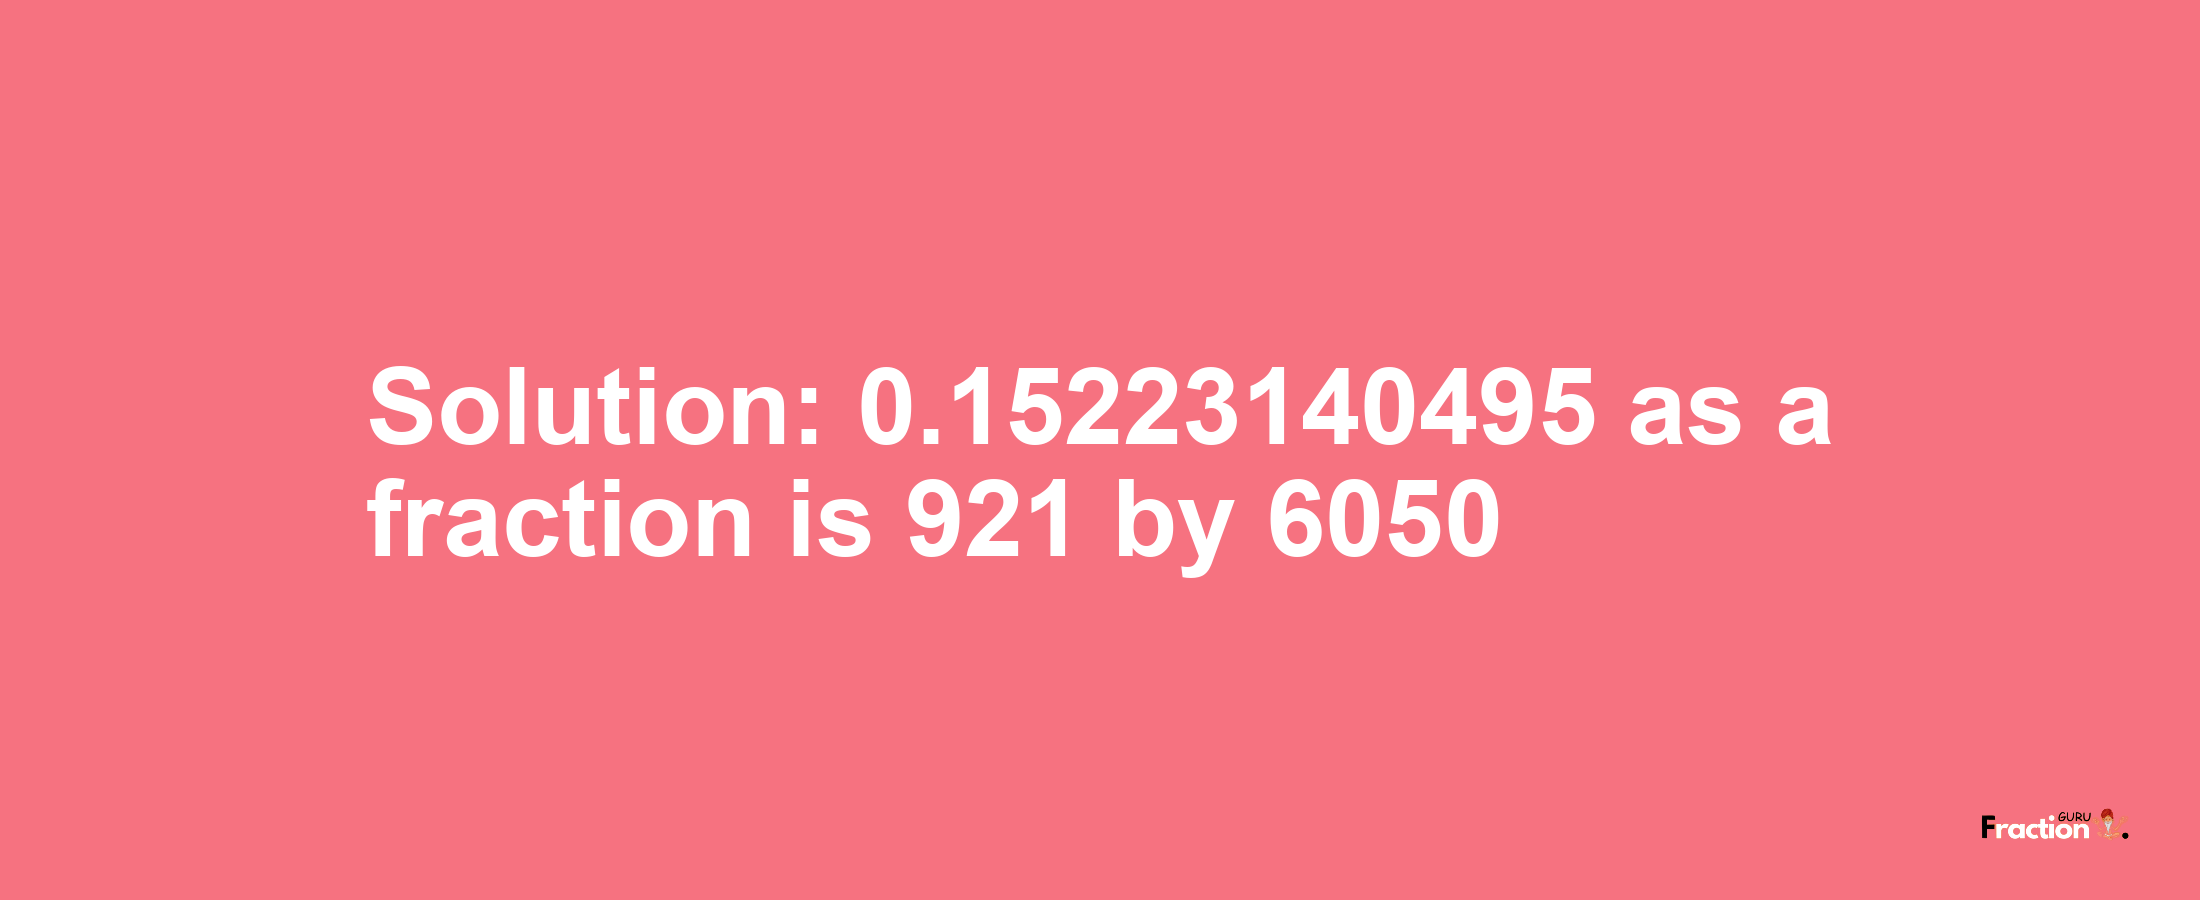 Solution:0.15223140495 as a fraction is 921/6050